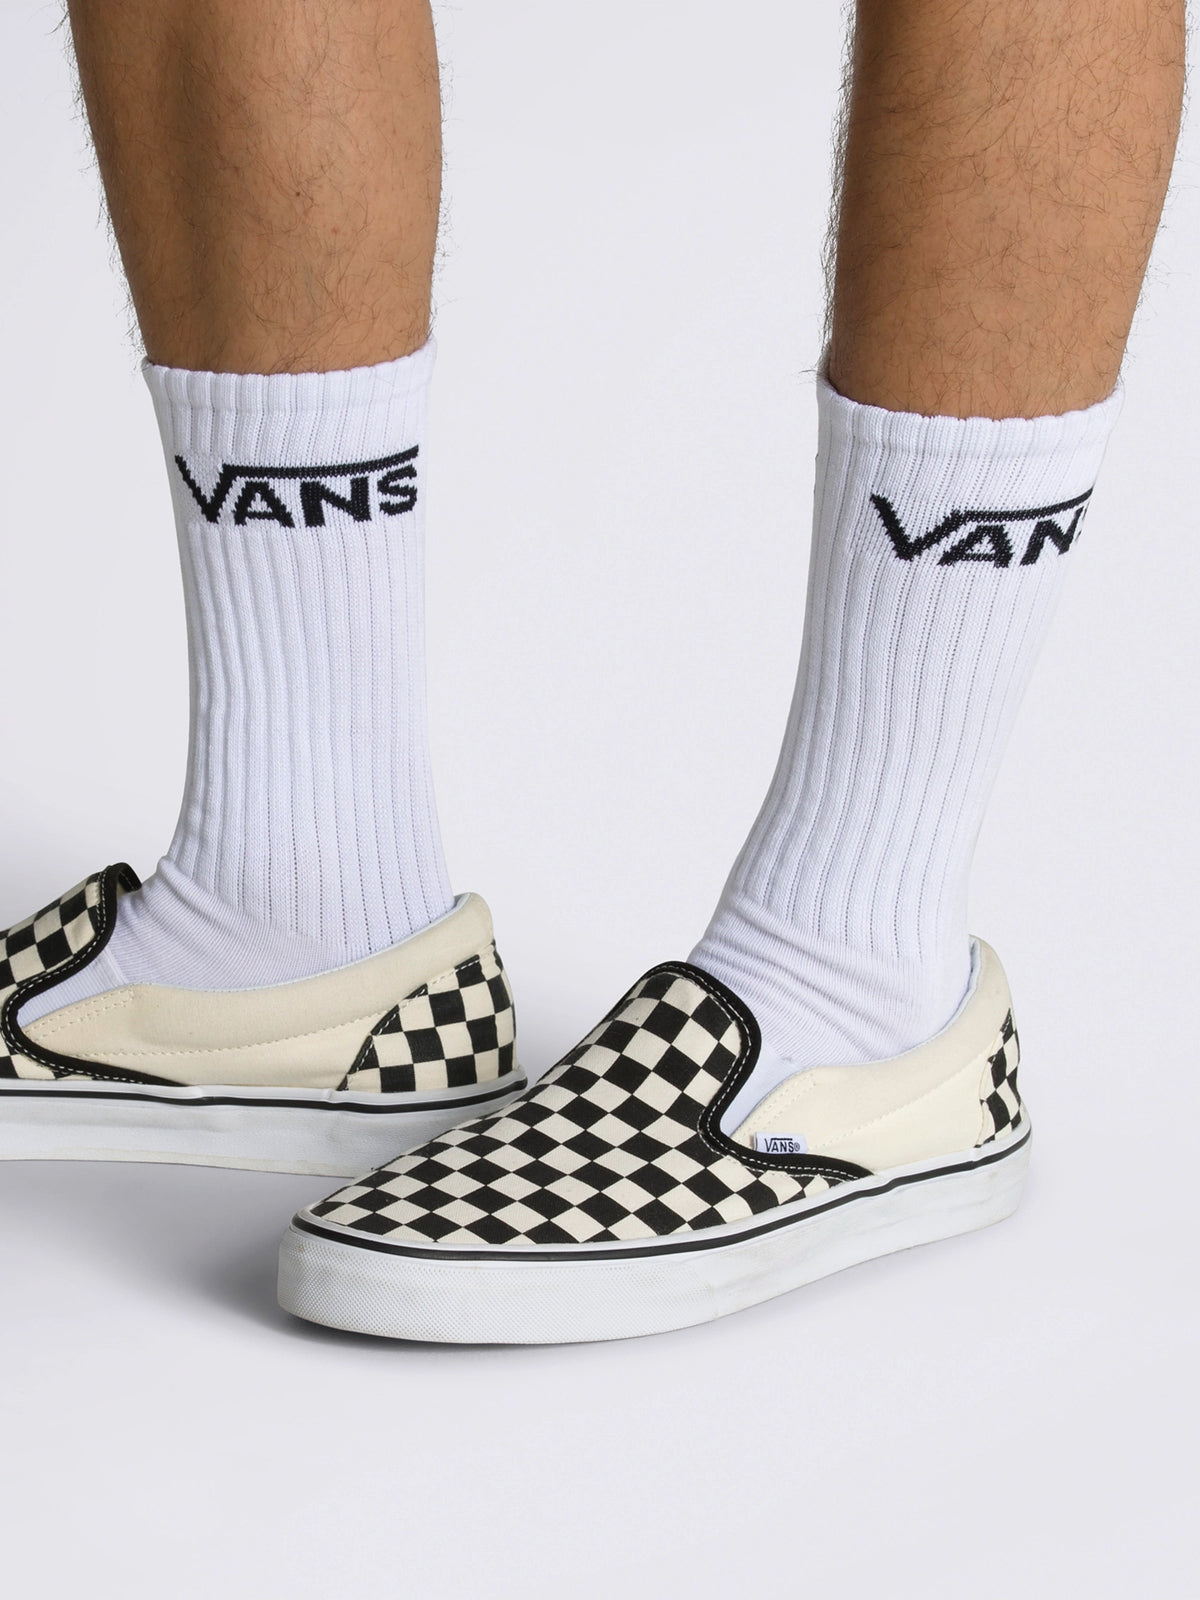 VANS CLASSIC CREW 3 PACK Footwear | SOCKS Collective Boathouse